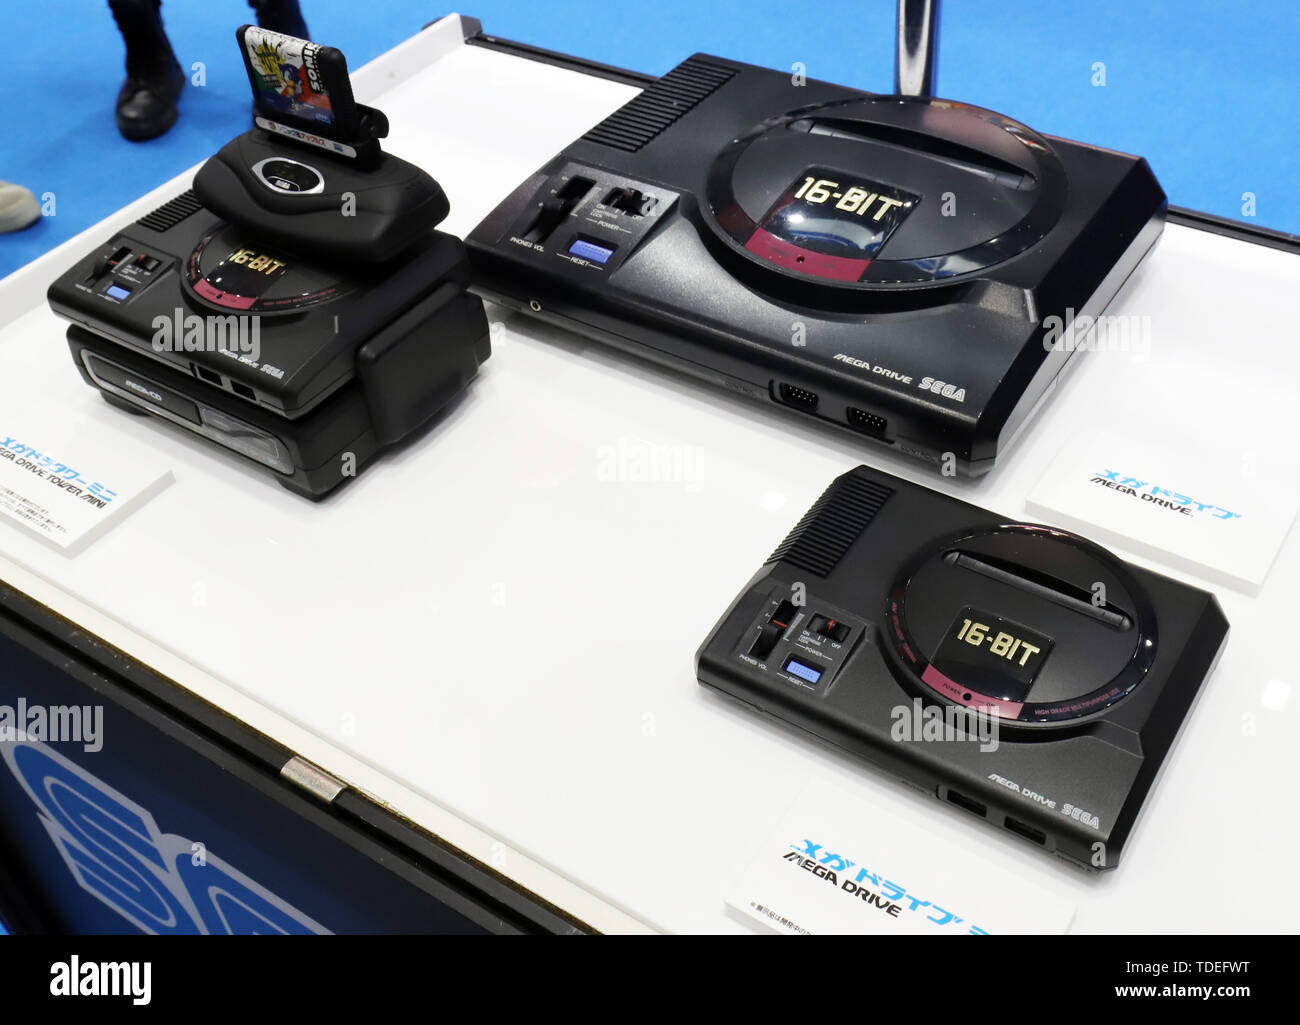 Tokyo, Japan. 14th June, 2019. Japanese video game company Sega displays a miniature model of Sega's iconic video game console Mega Drive with 40 built-in classical video game softs is displayed at the annual International Tokyo Toy Show in Tokyo on Friday, June 14, 2019. Some 160,000 people are expecting to visit a four-day toy trade show which displays 35,000 latest toys from 40 countries. (Photo by Yoshio Tsunoda/AFLO Stock Photo